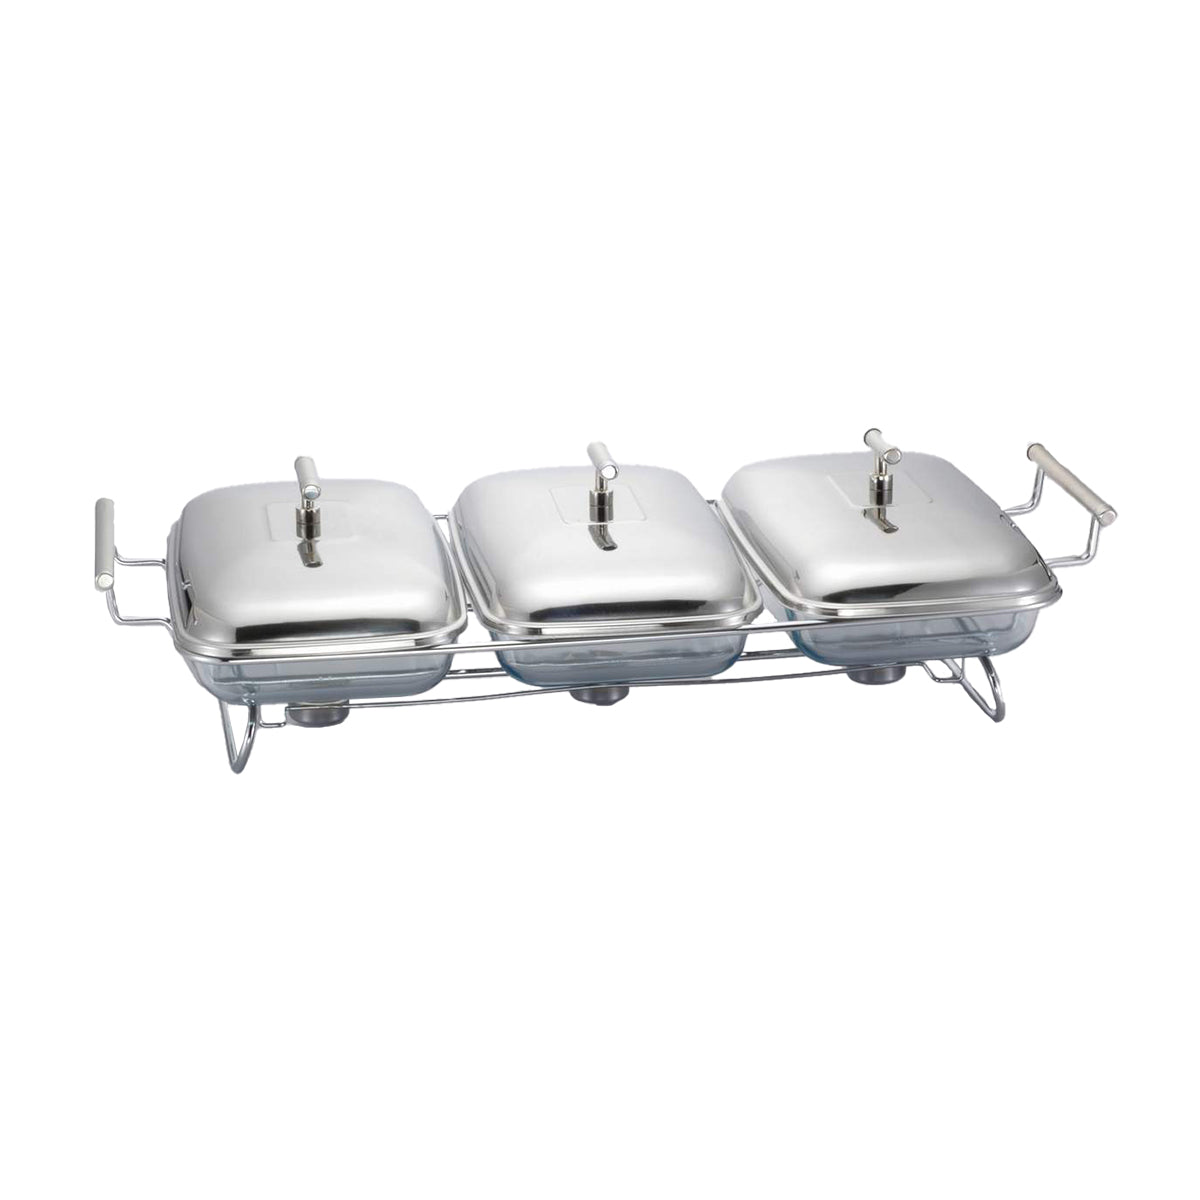 3 Rectangular Food Warmers with Three Candles -3x1.5 Lit. -Stainless Steel 18/10 & Tempered Glass